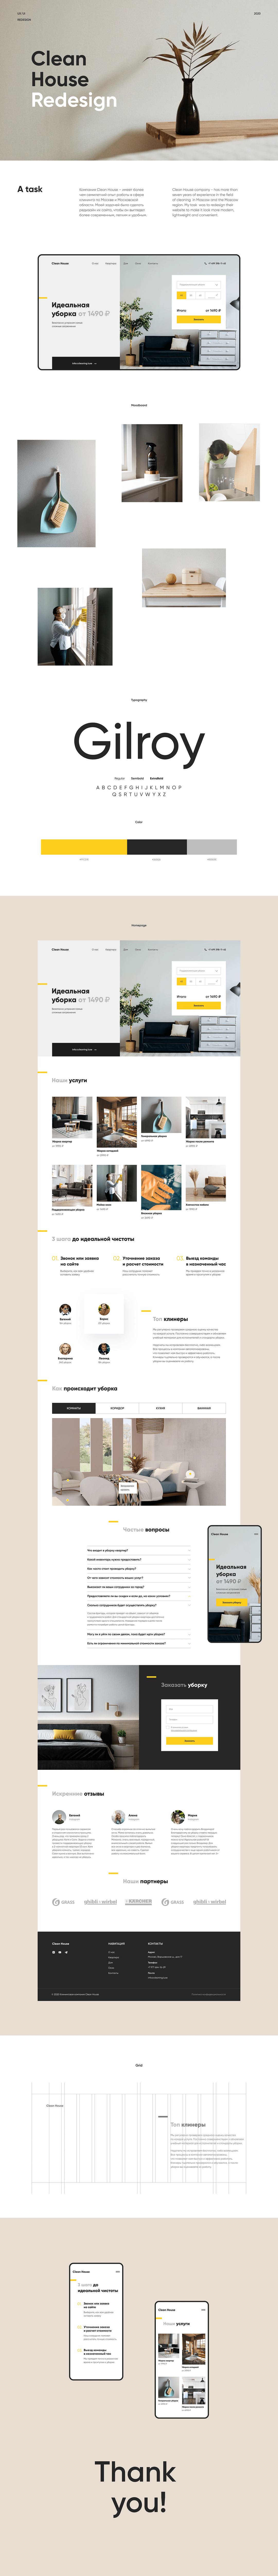 clean house clining Interface redesign UI ux Webdesign клининг